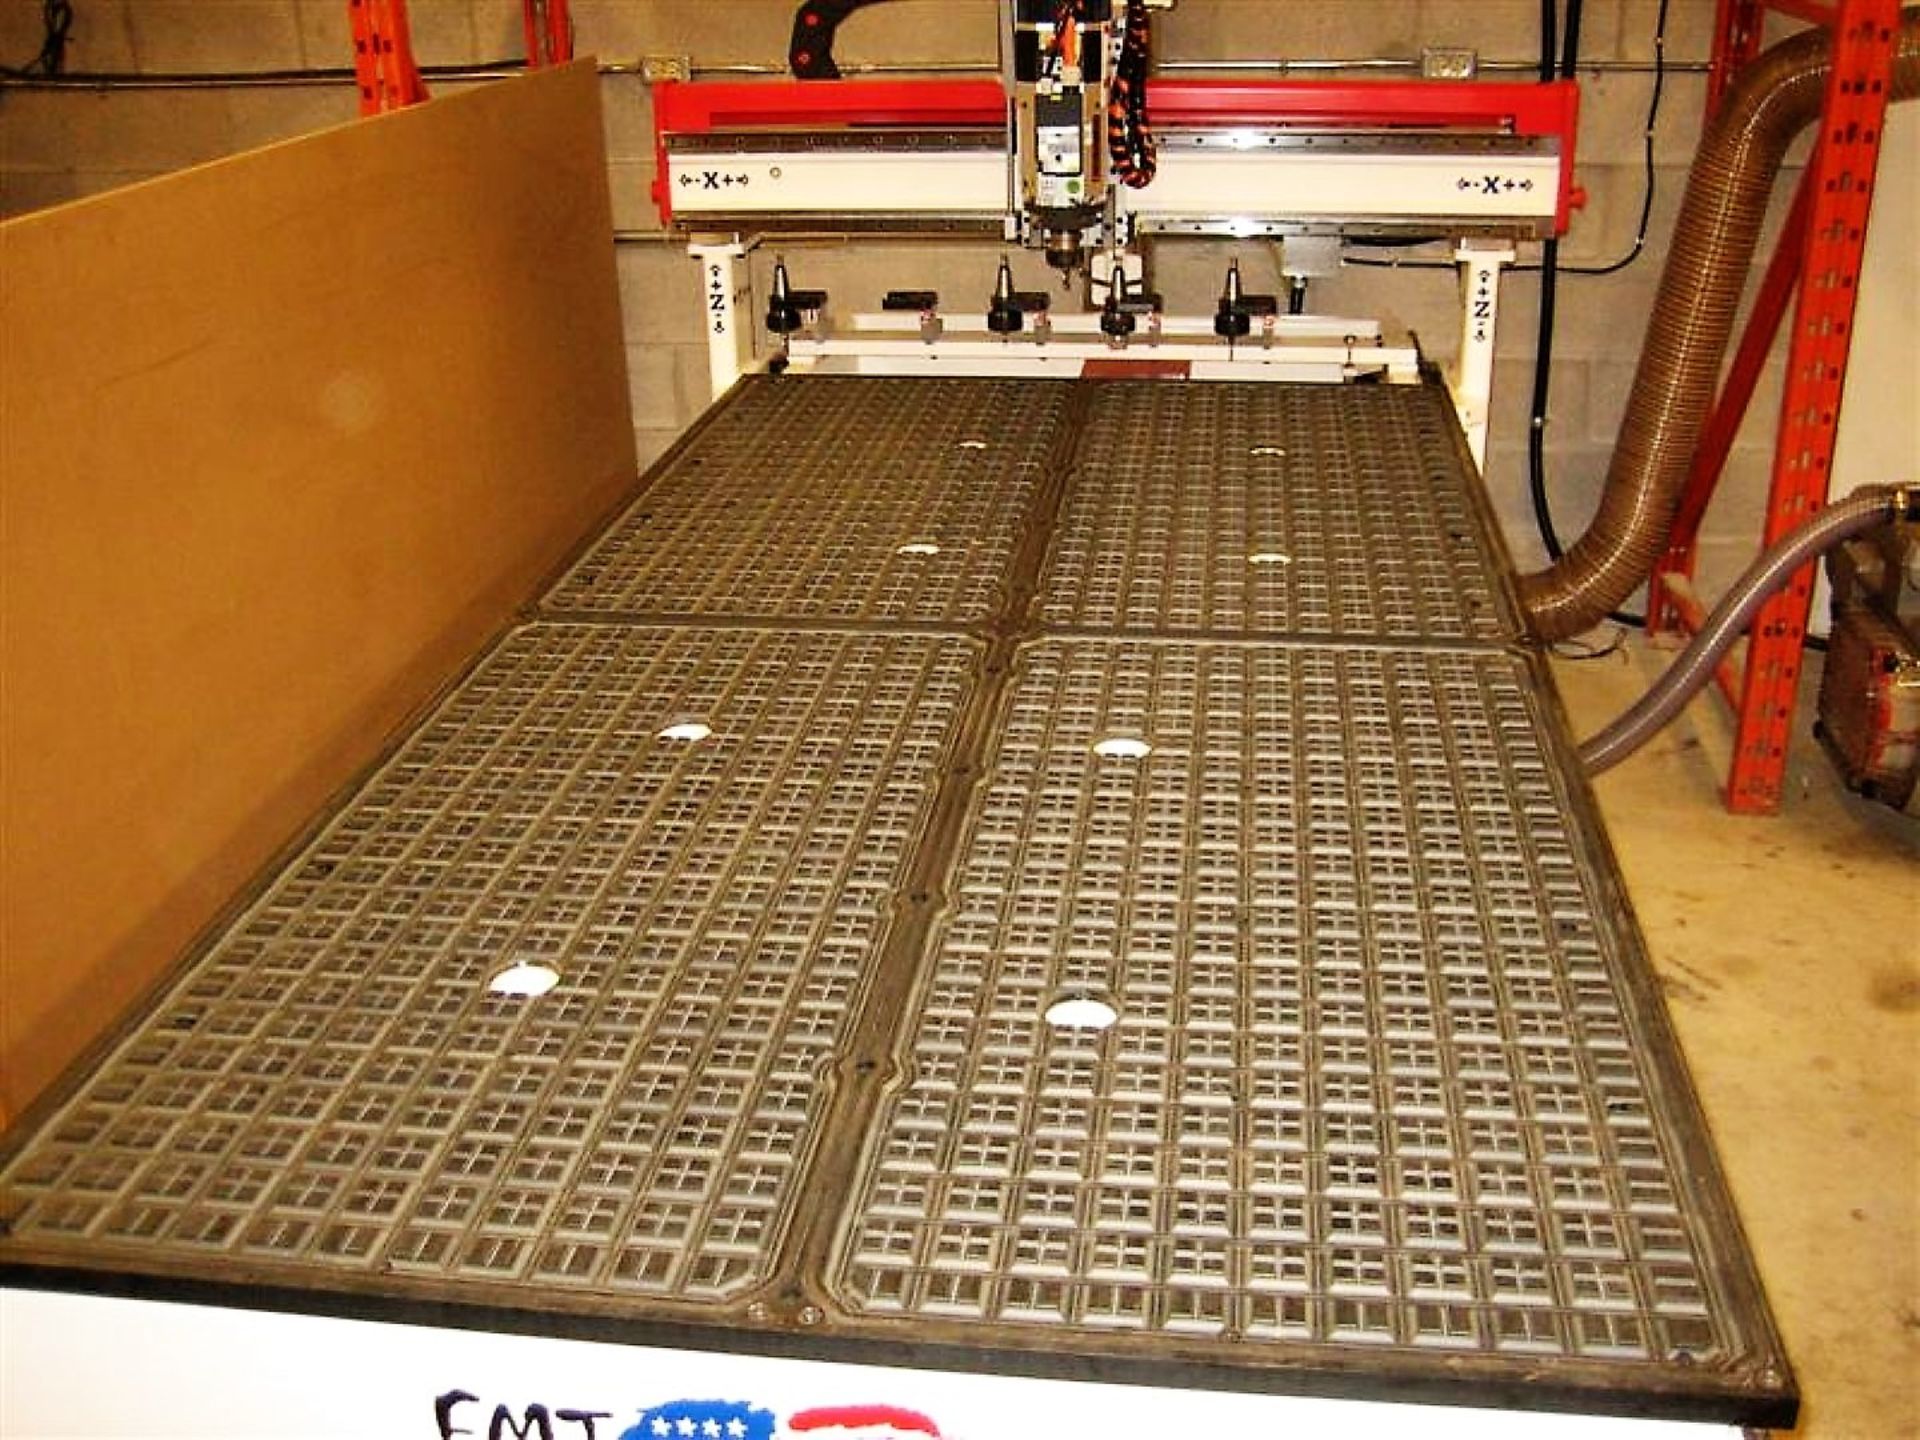 4'x8' Freedom Machine Model FMT-F35-4-8-7 CNC Router, S/N 40G&, New 2012 - Image 6 of 11